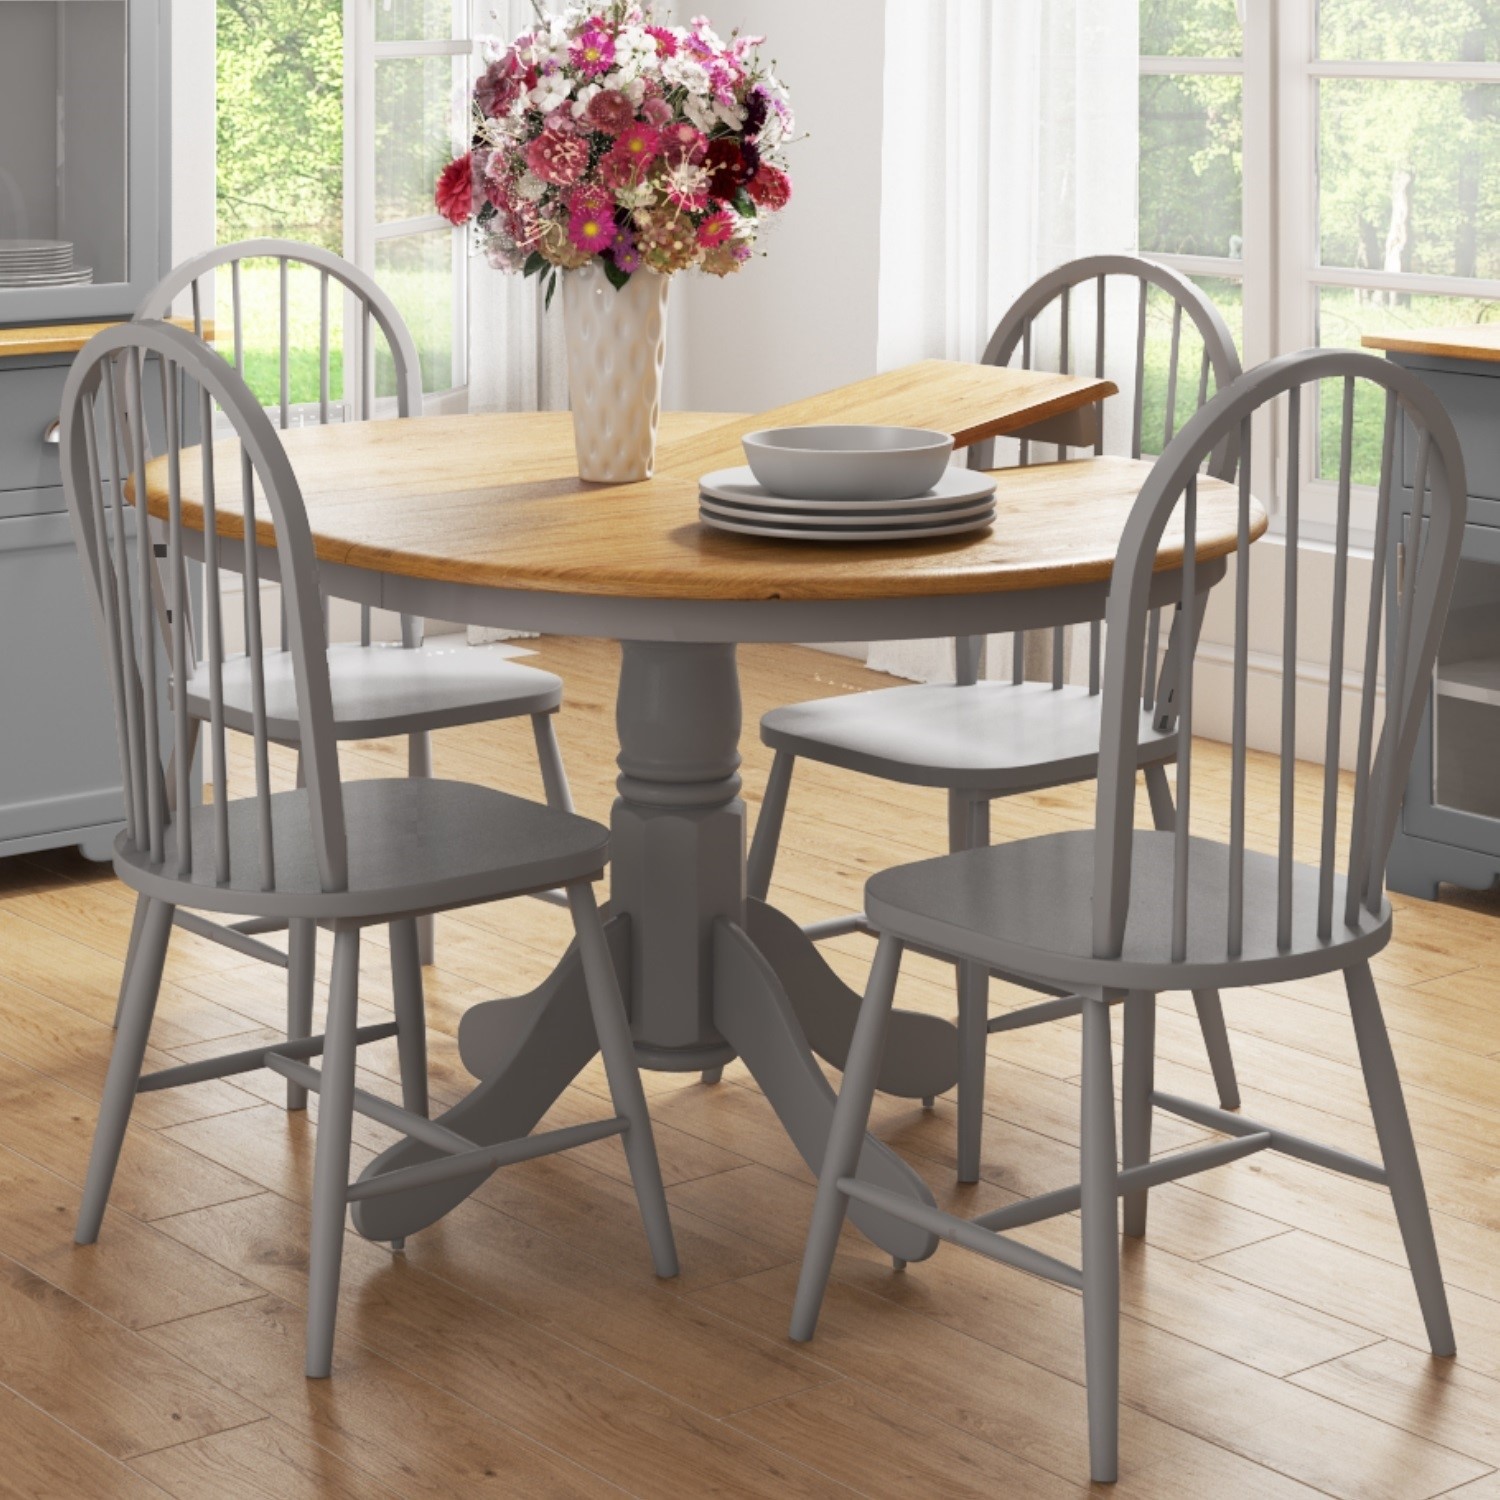 Round Extendable Dining Table Set With, Round Wooden Tables And Chairs